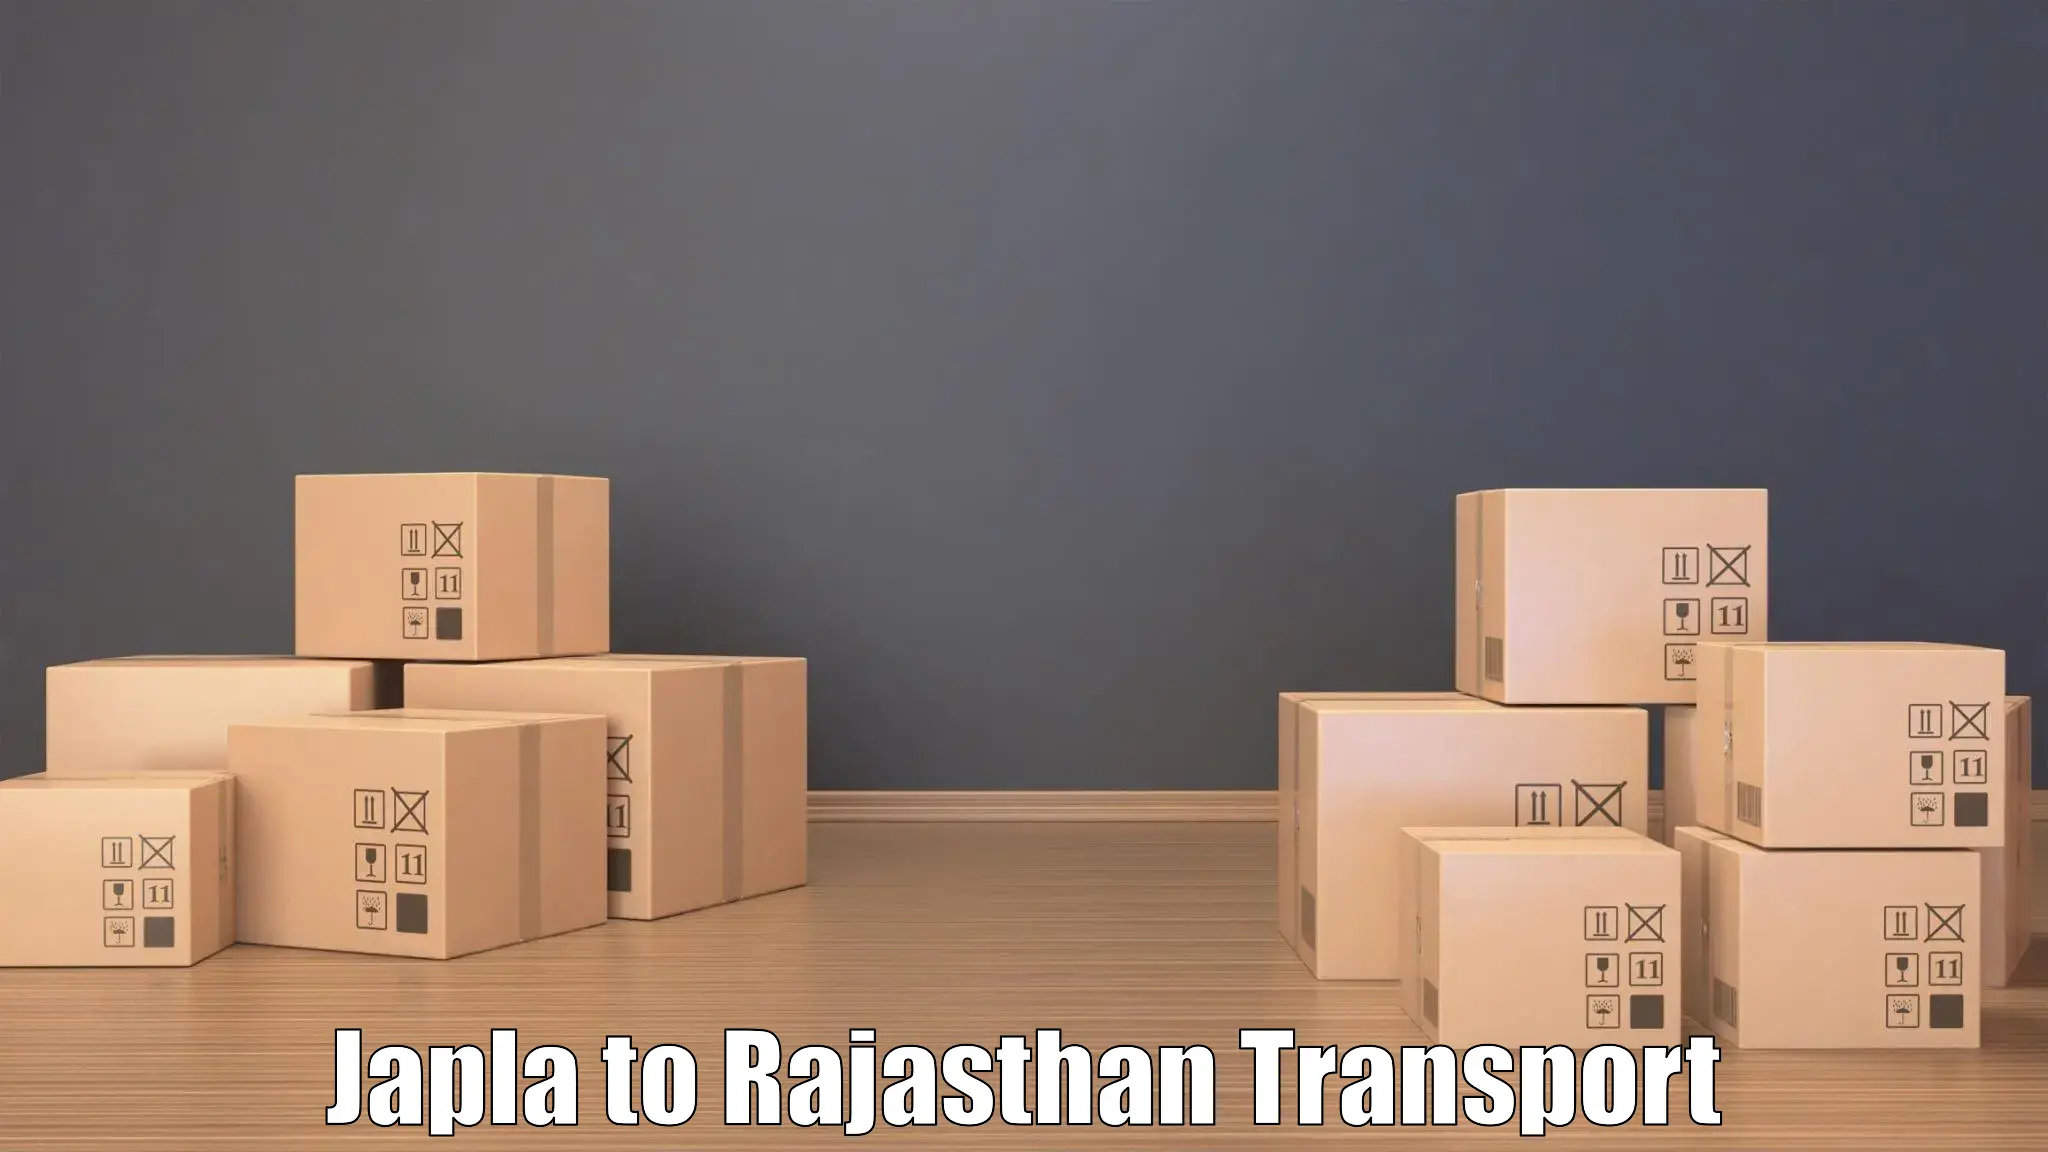 Container transport service Japla to Sultana